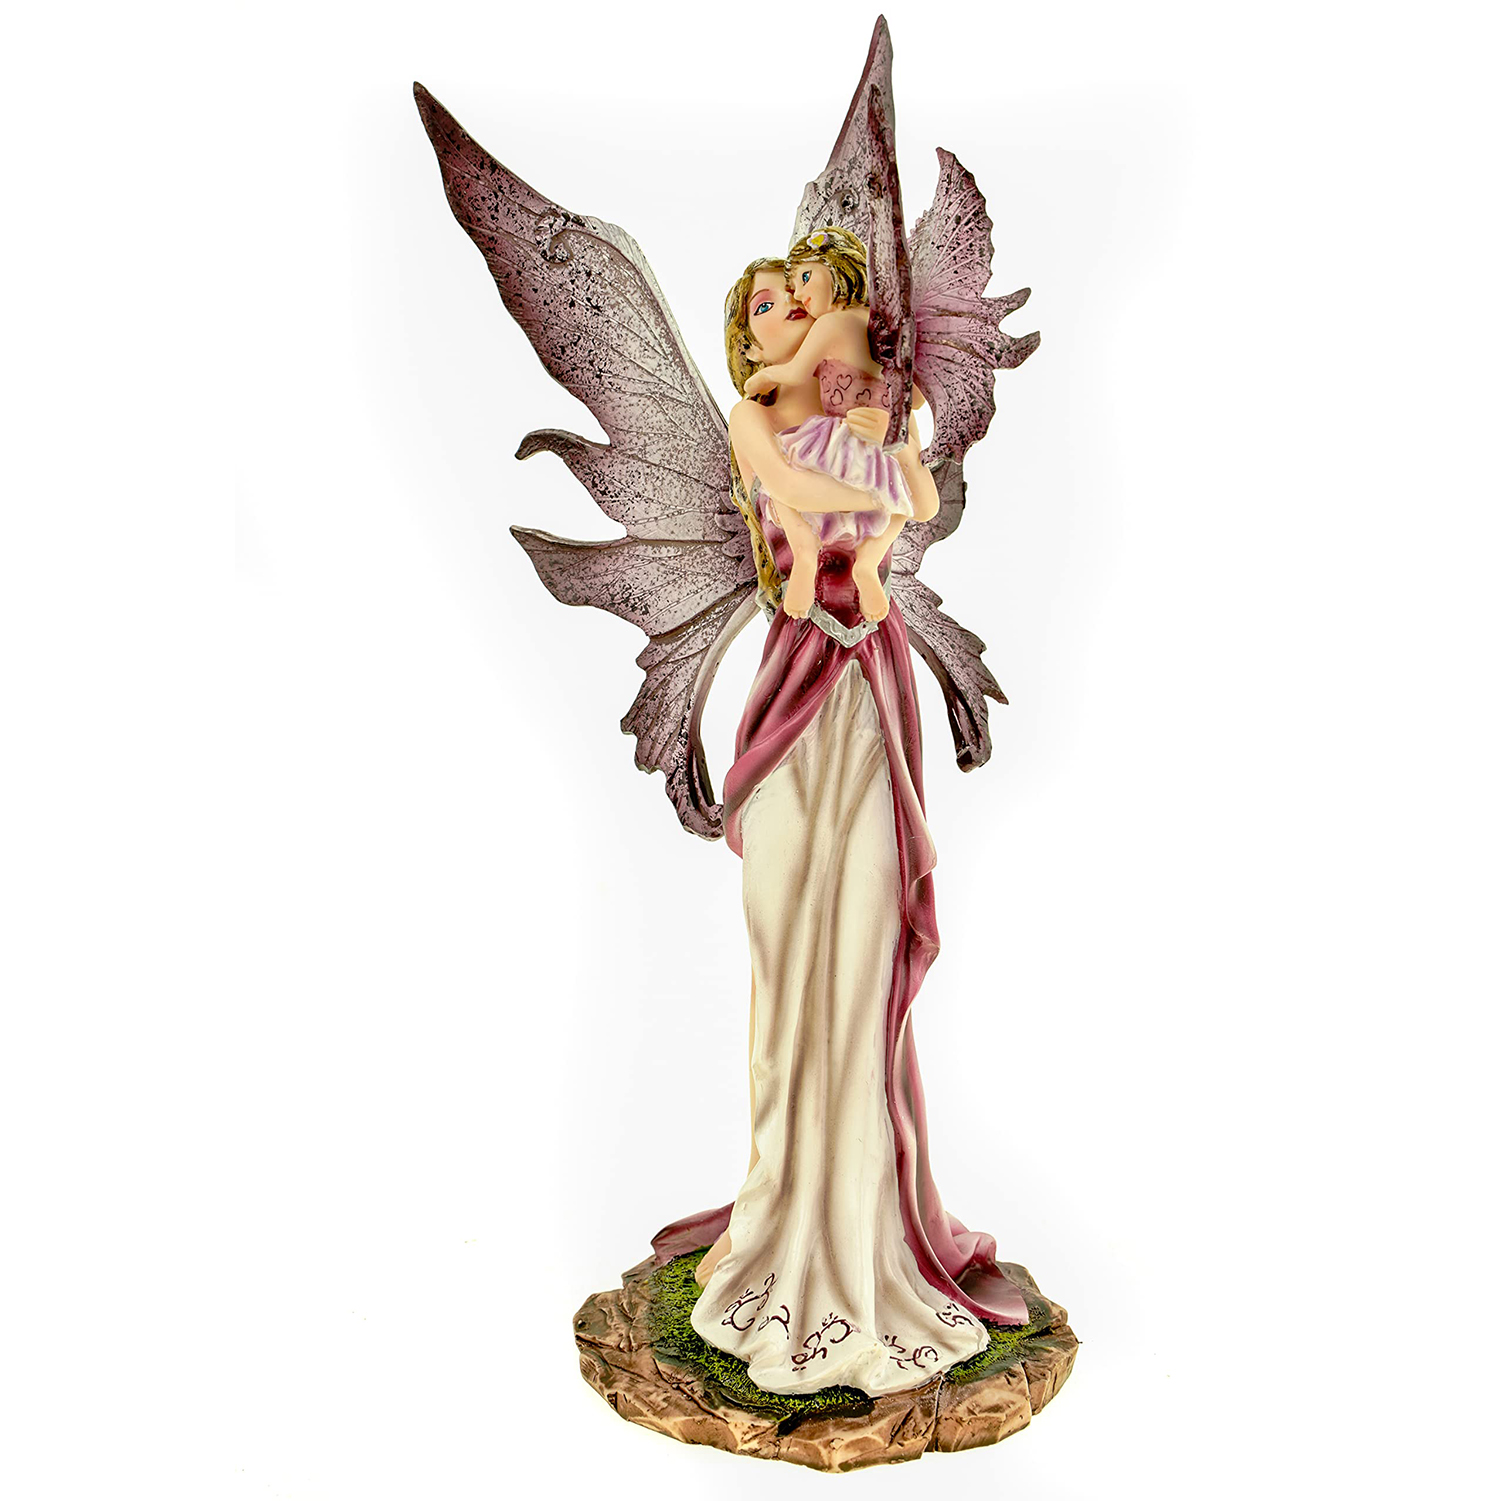 Fairy Figurines for Sale